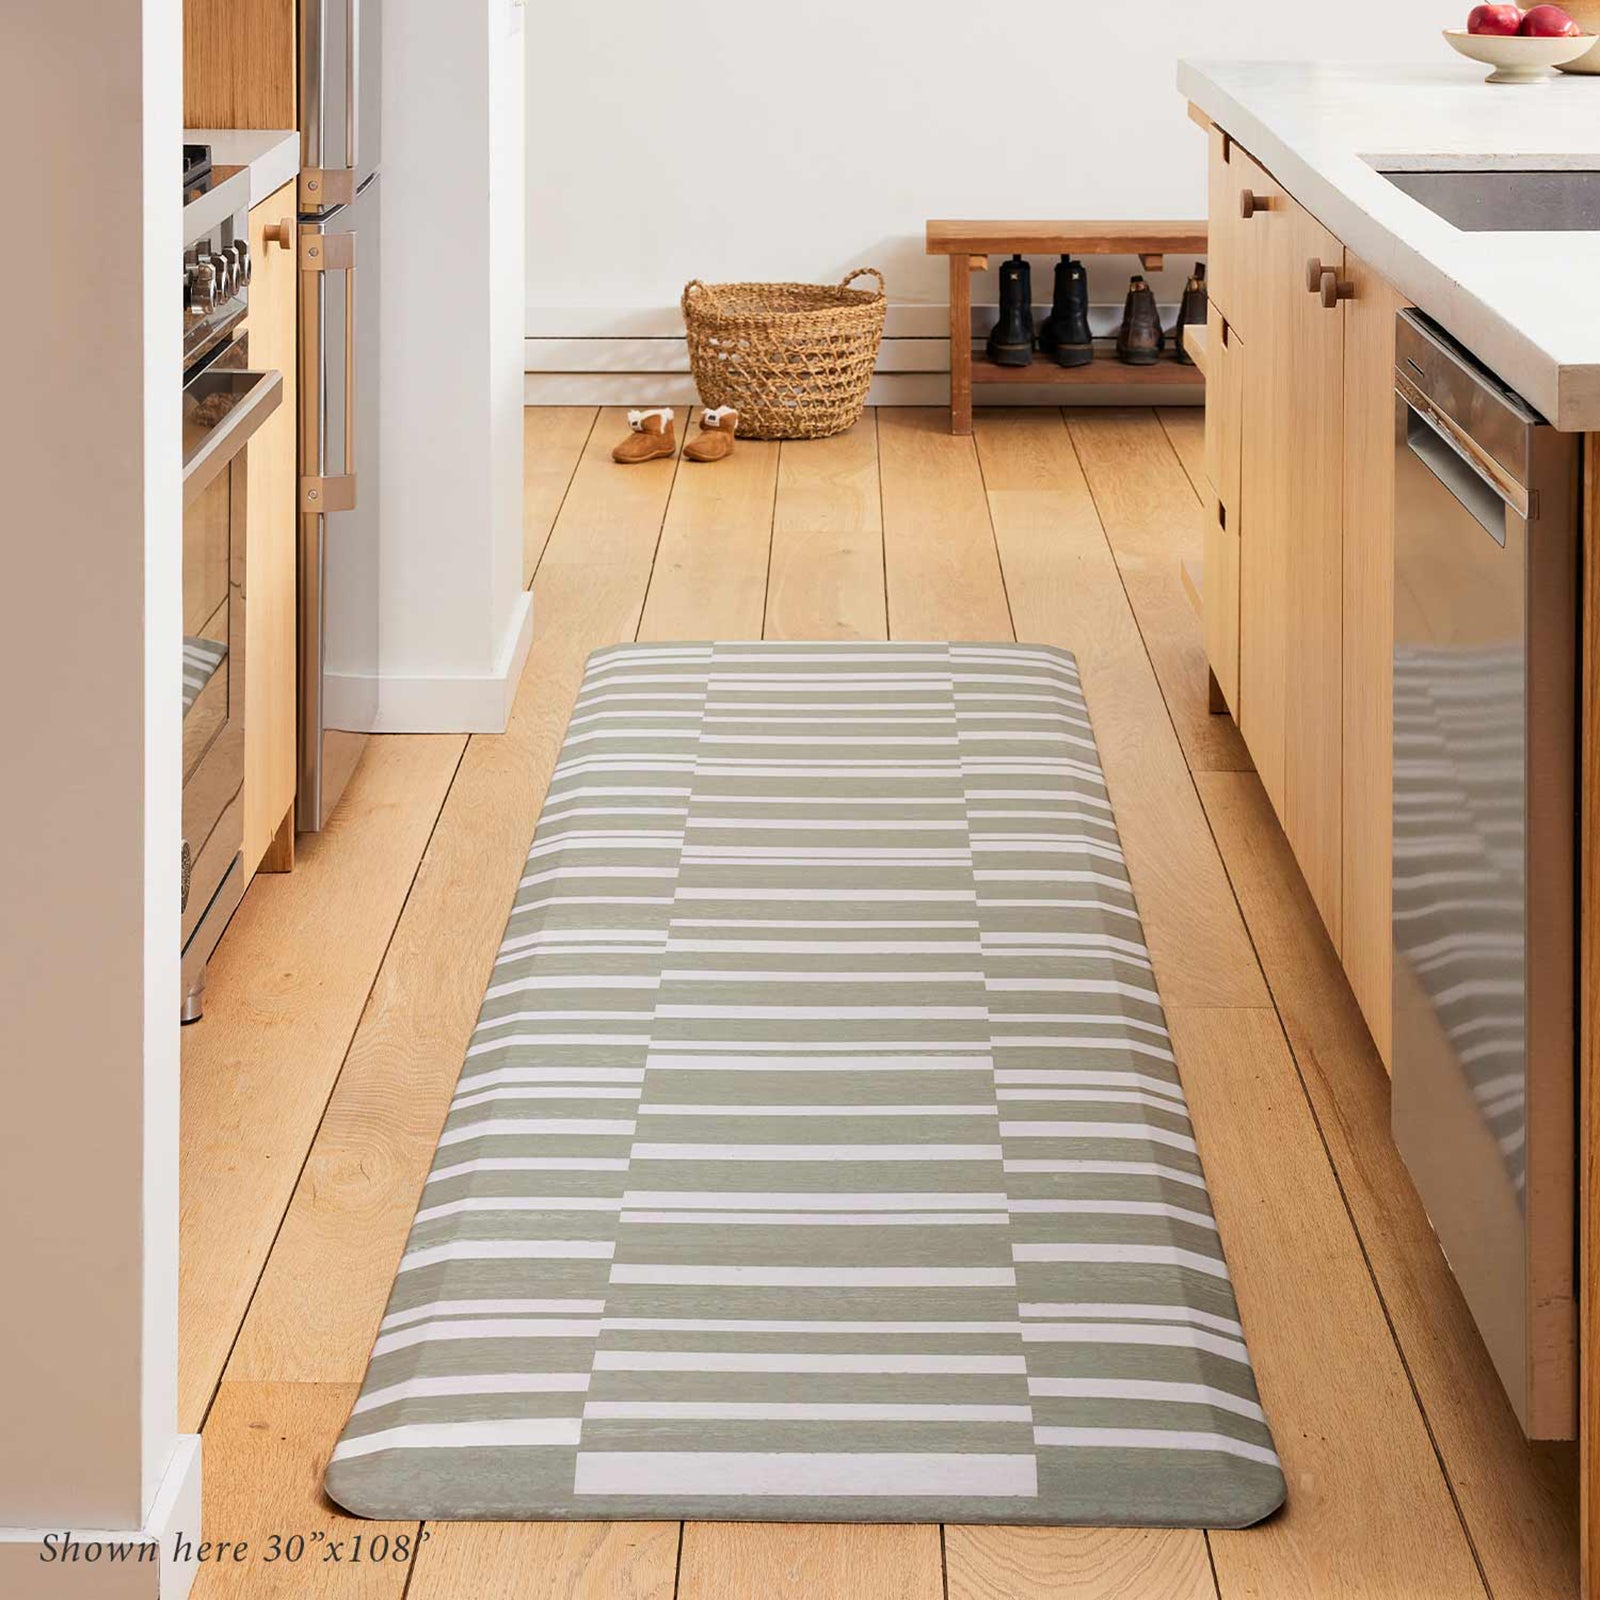 sutton stripe basil green and white inverted stripe standing mat shown in a light wood toned kitchen in size 30x108